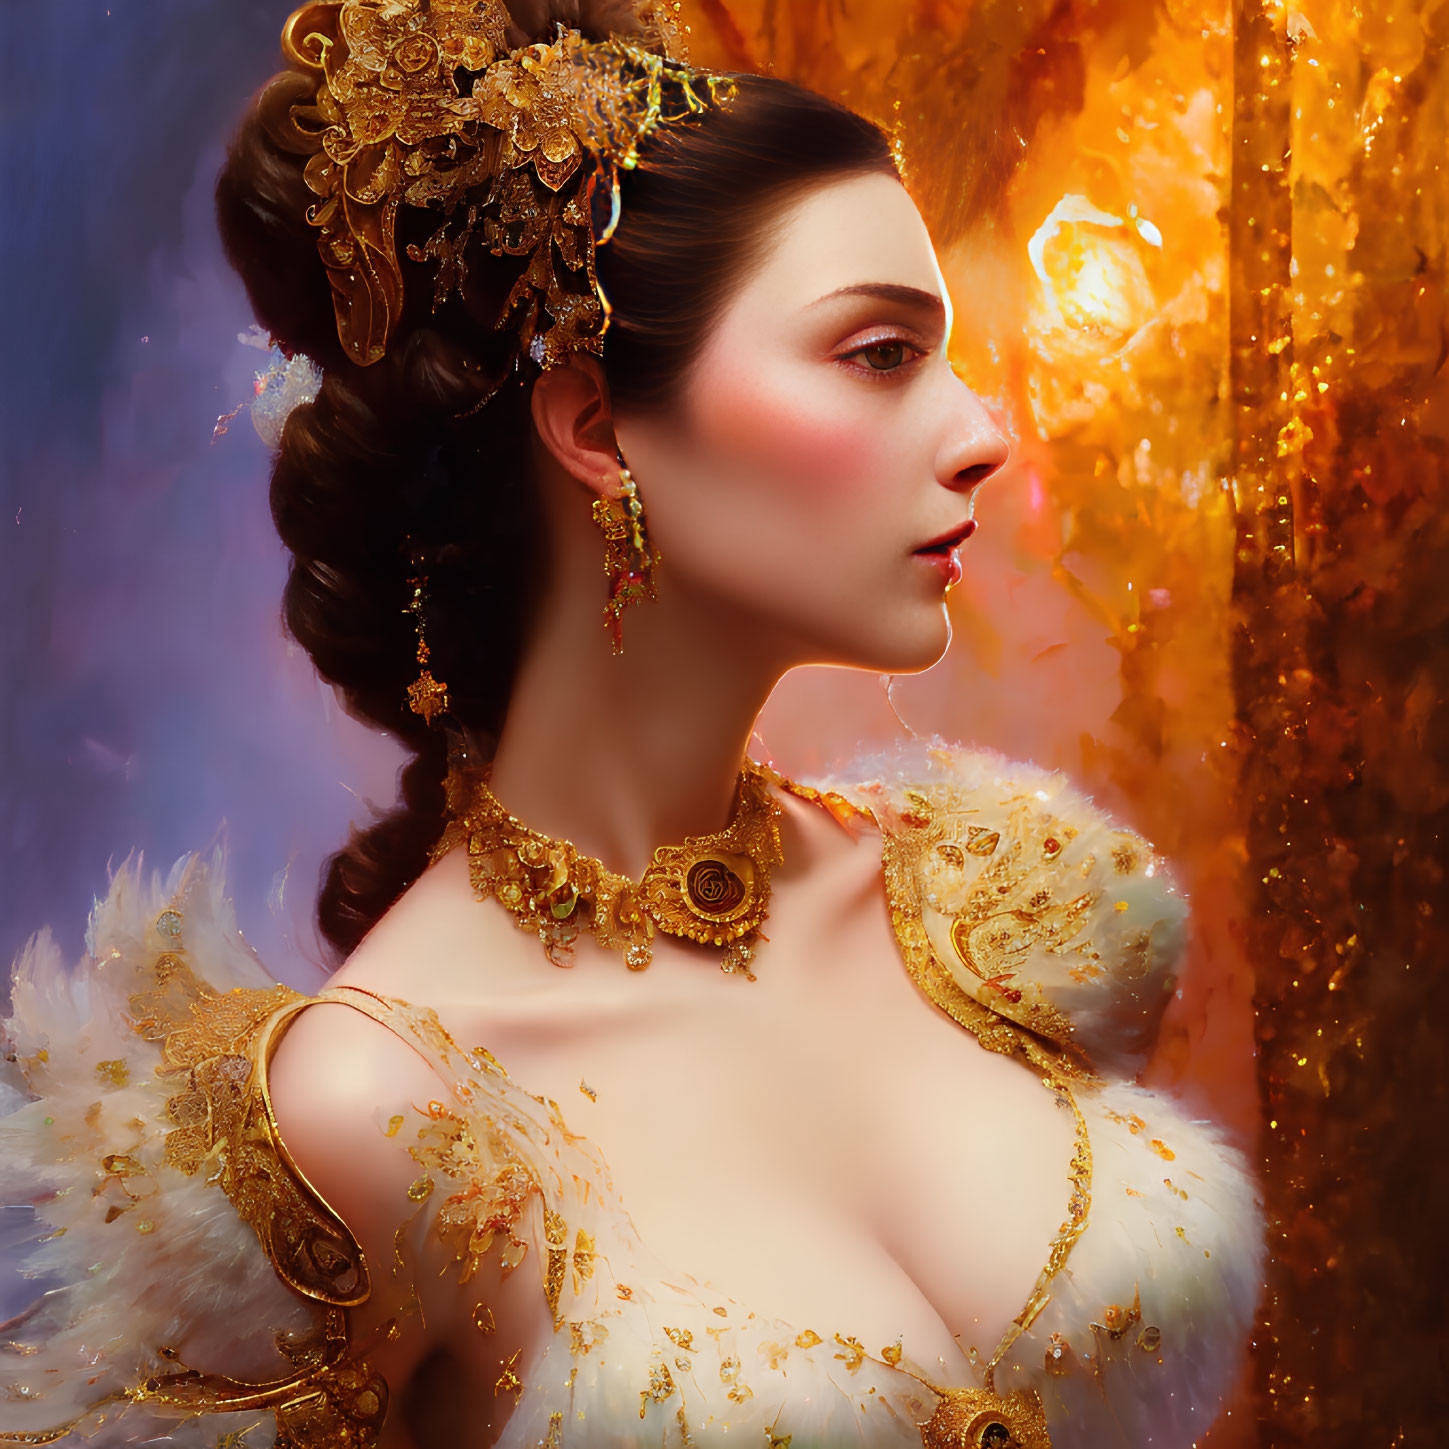 Elegant woman adorned with golden jewelry and ornate hairstyle on warm glowing backdrop